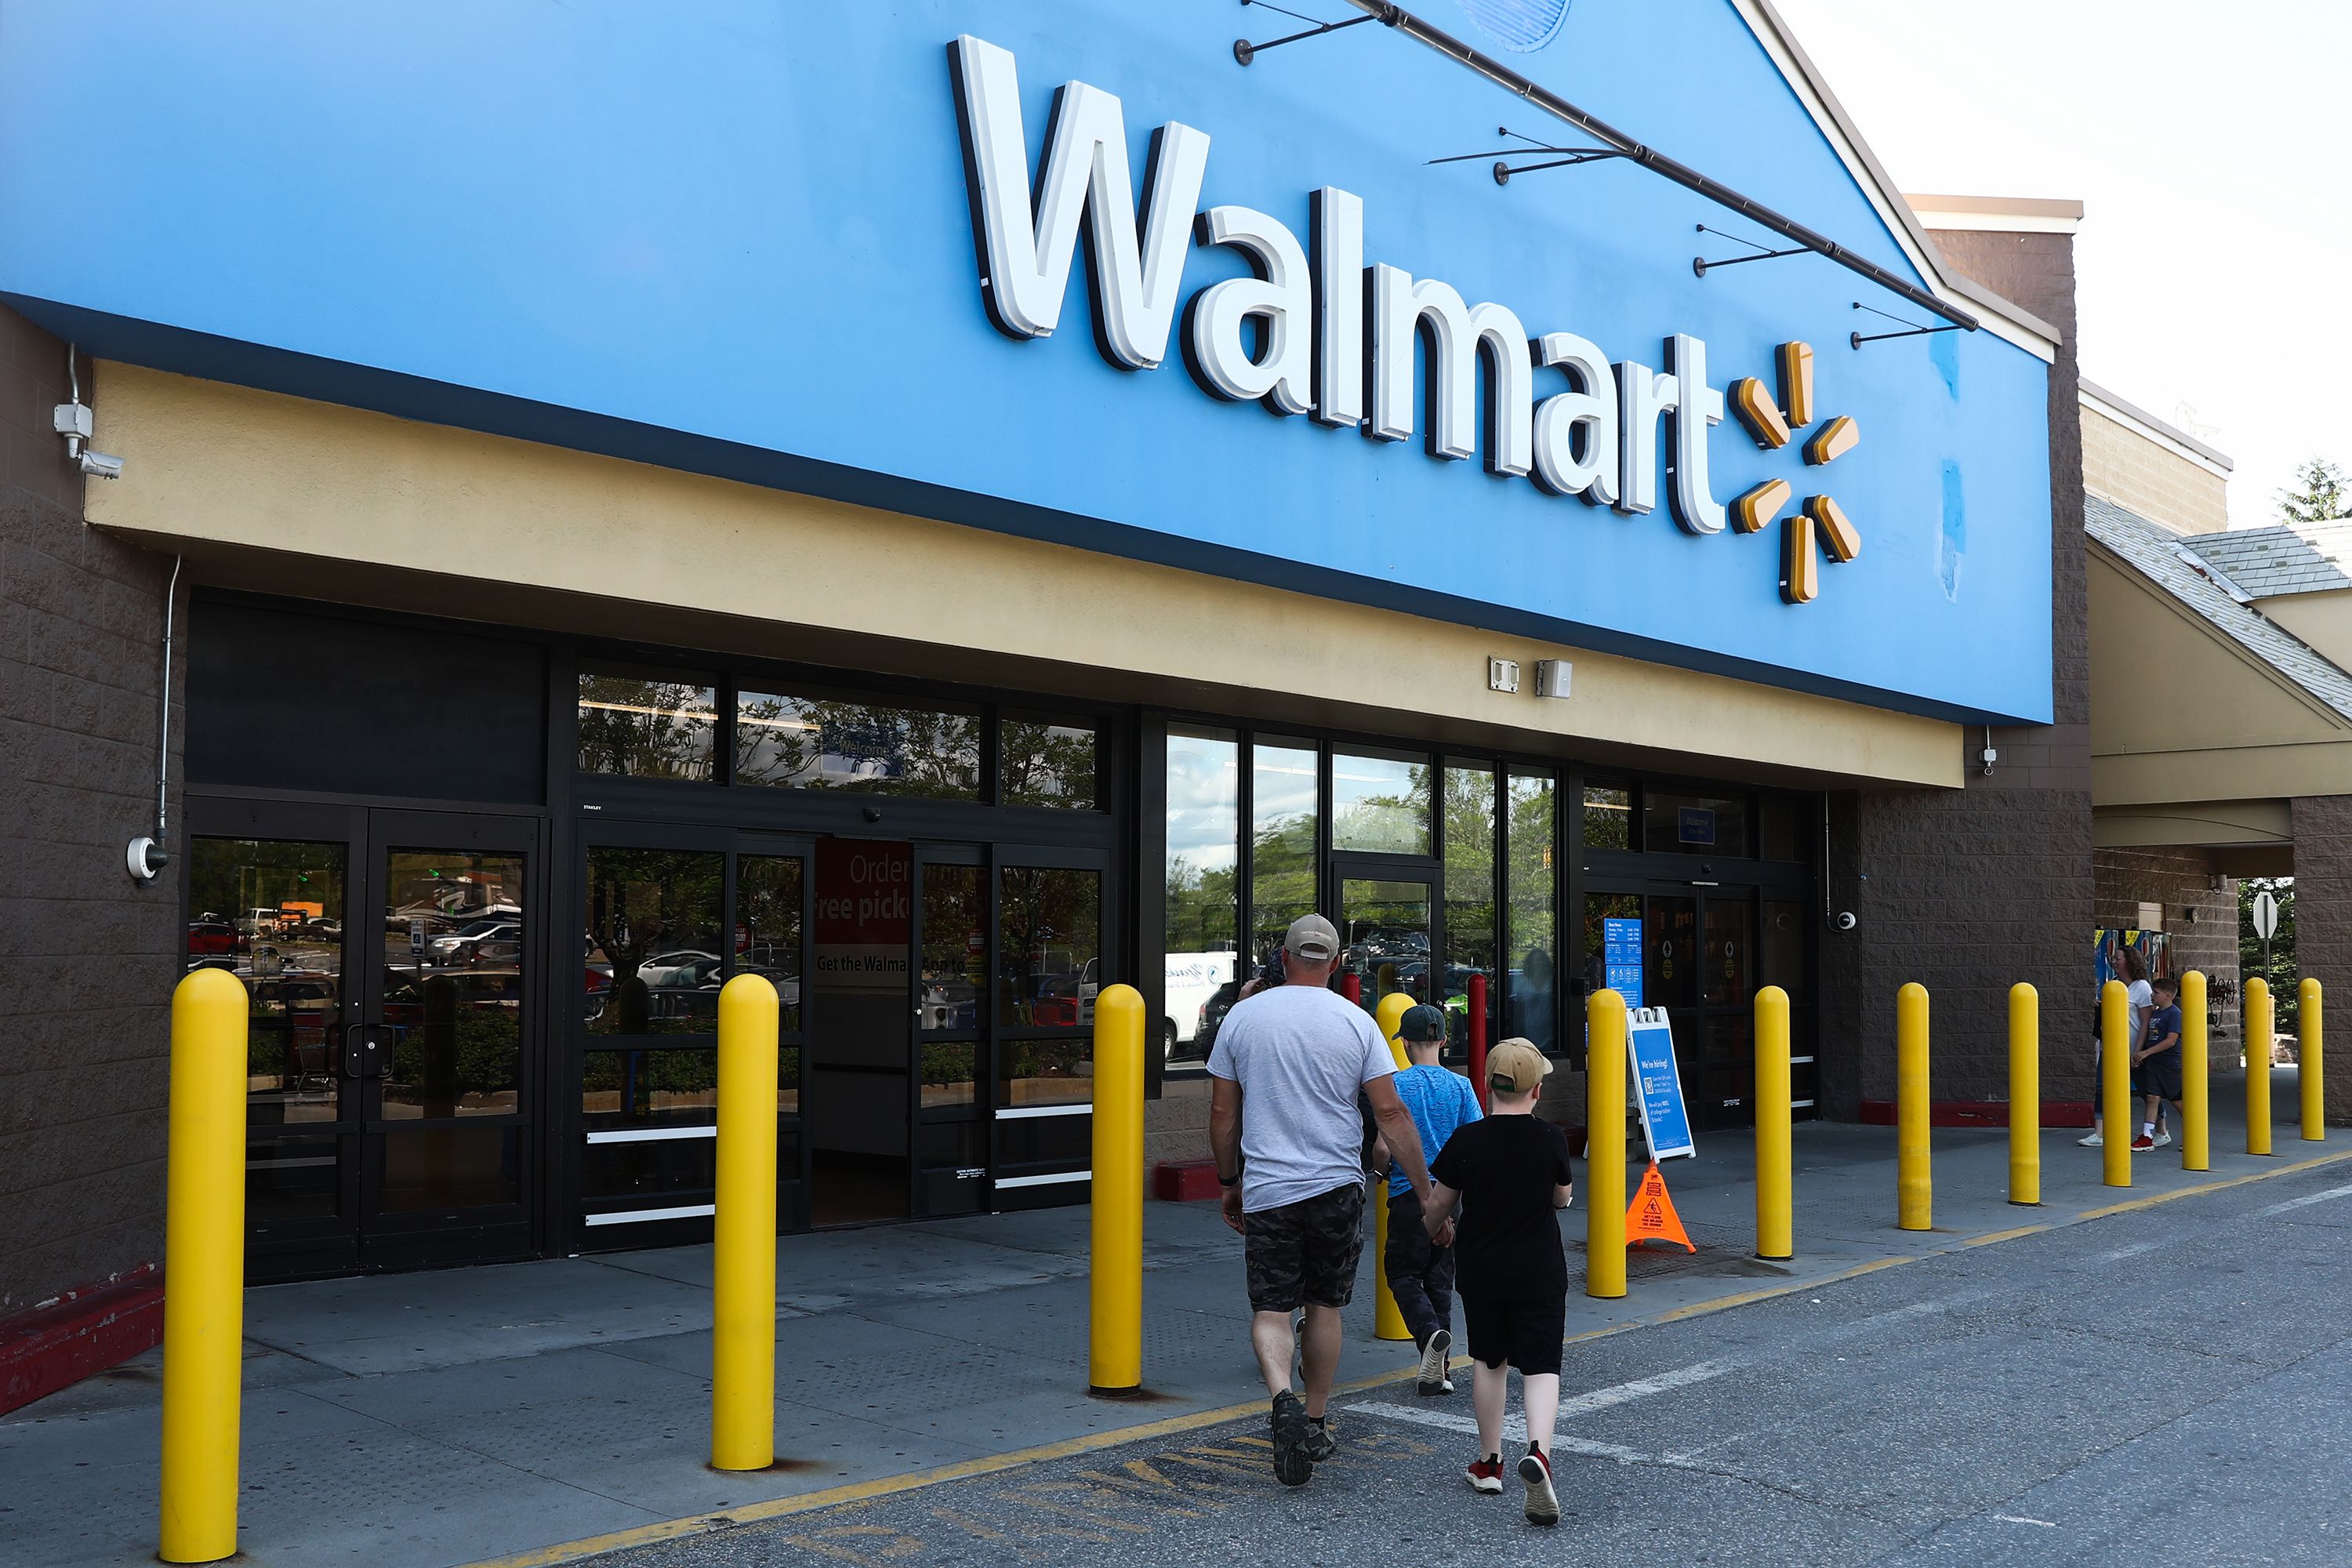 Walmart launching new clothes brands, as Target,  have